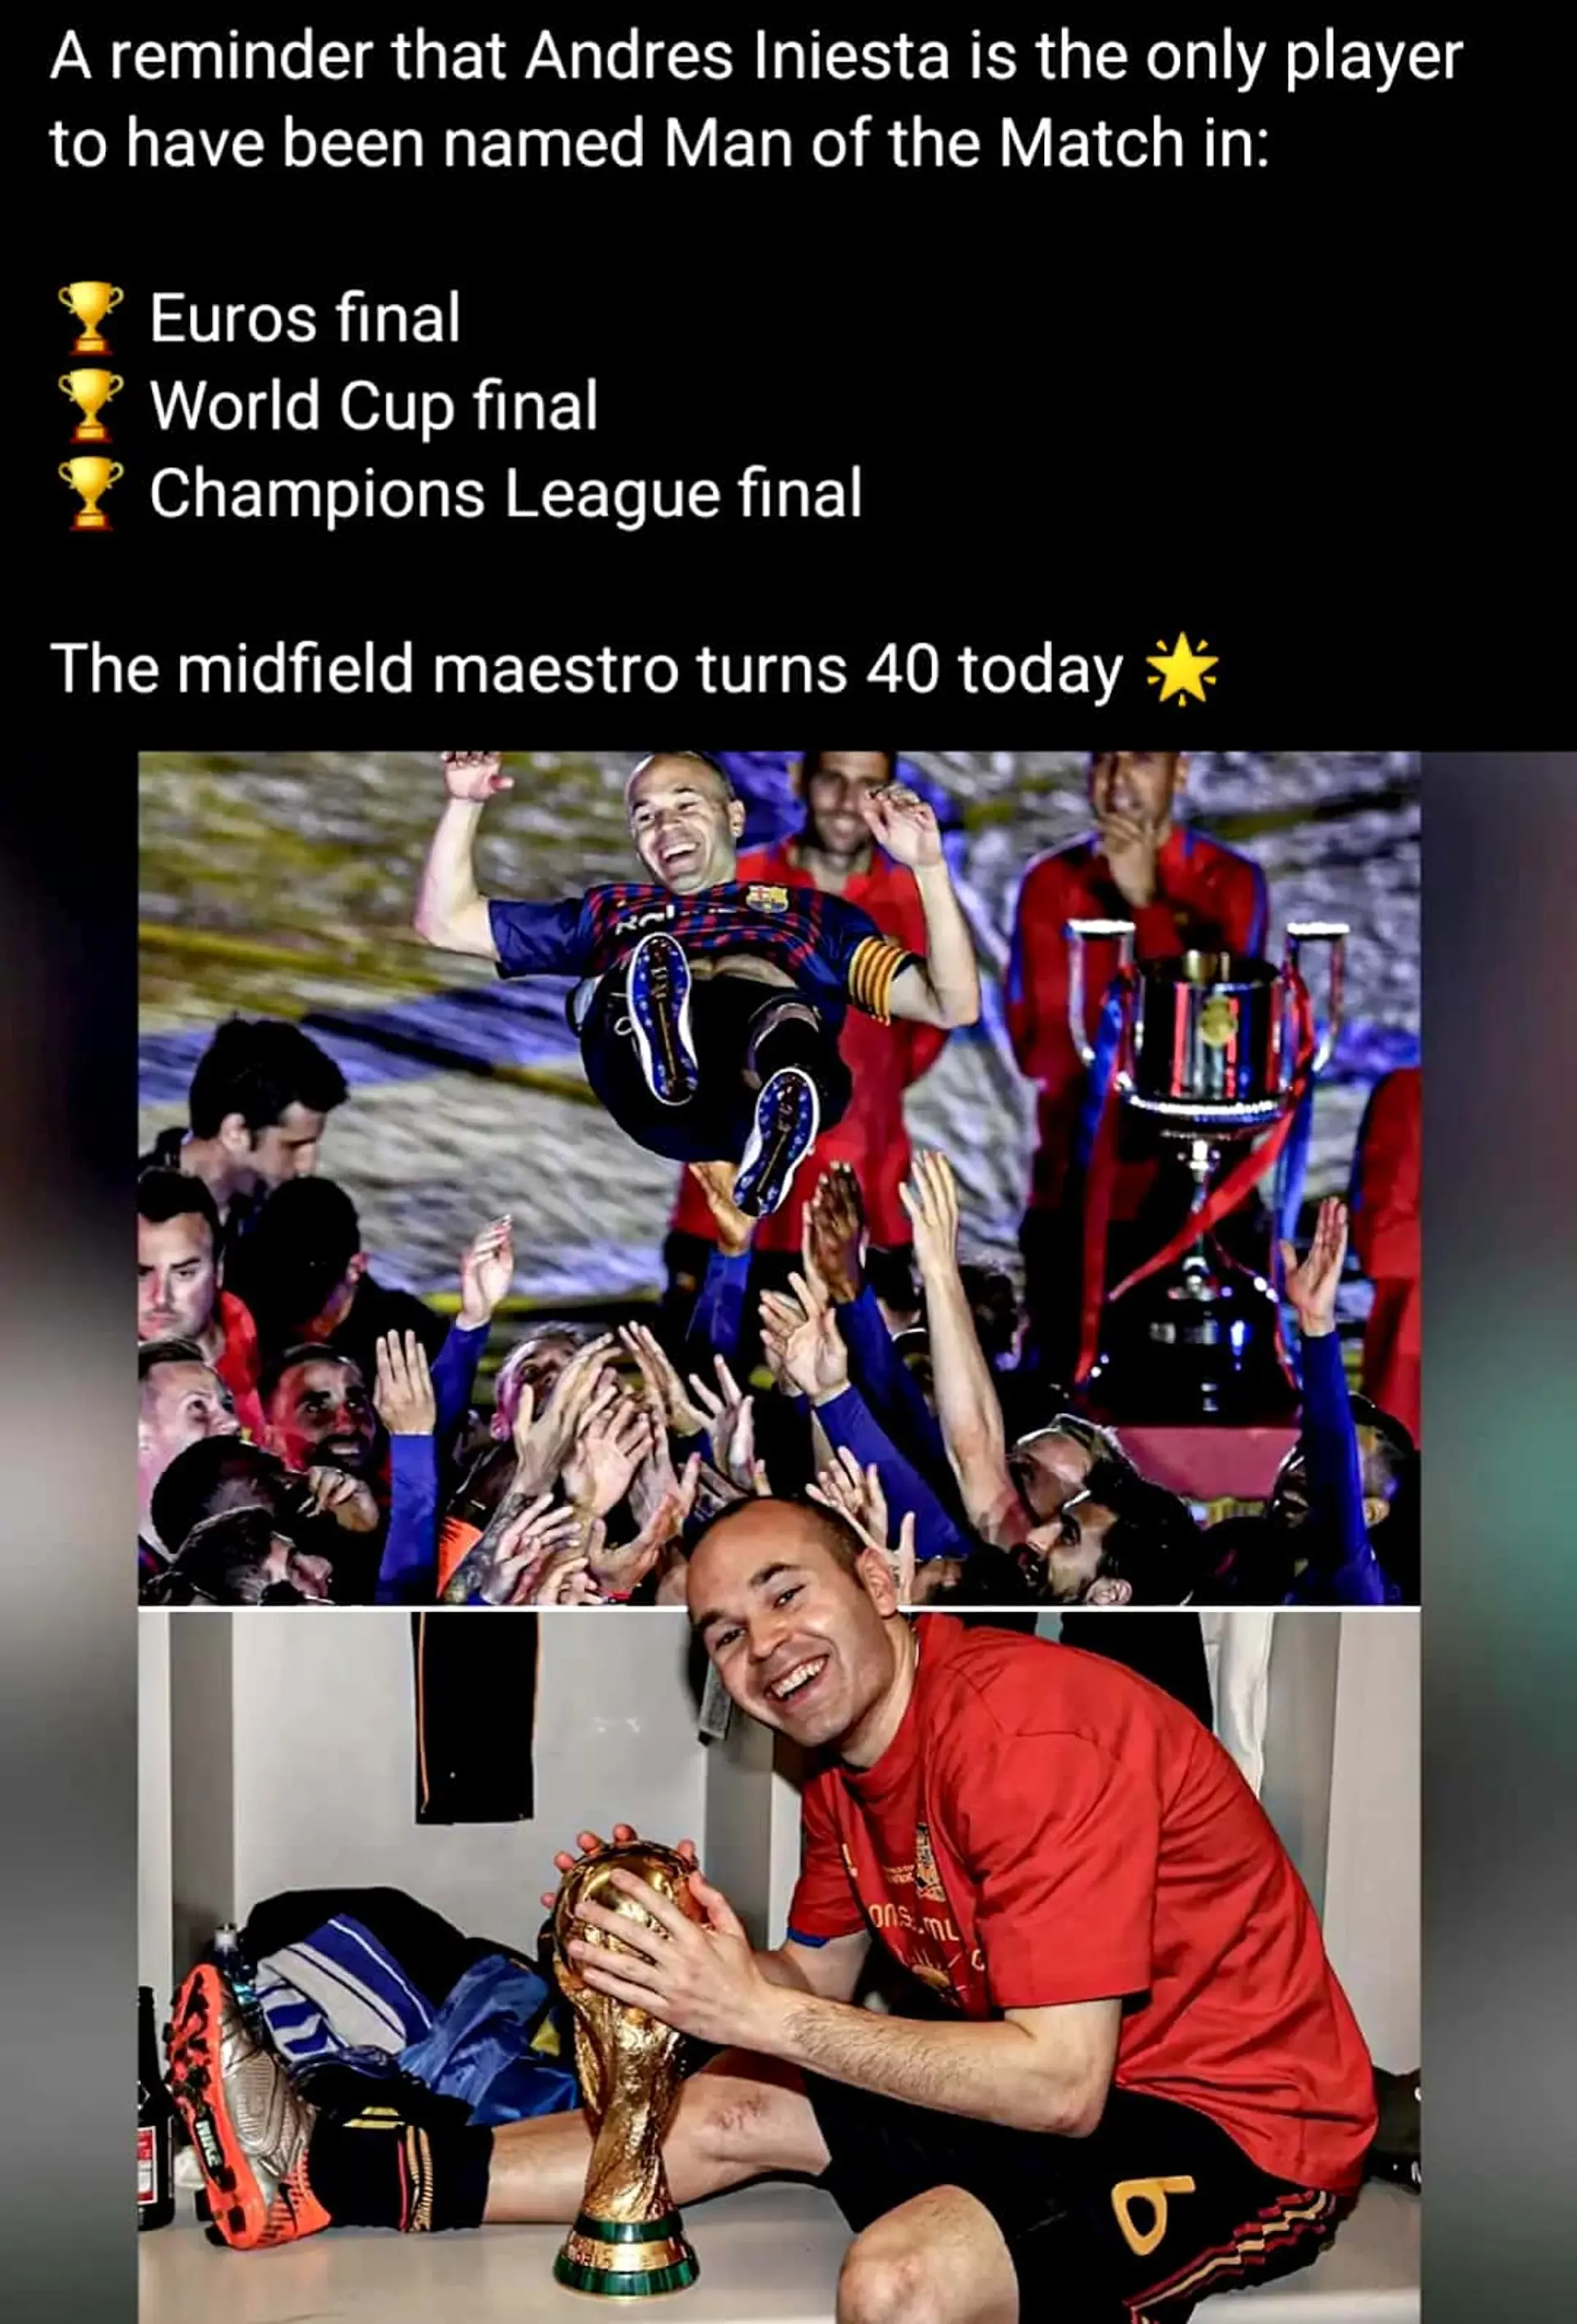 ⚽MAESTRO Iniesta, the Only Player with a MOTM Award in a Euros Final, World Cup Final and UCL Final❗